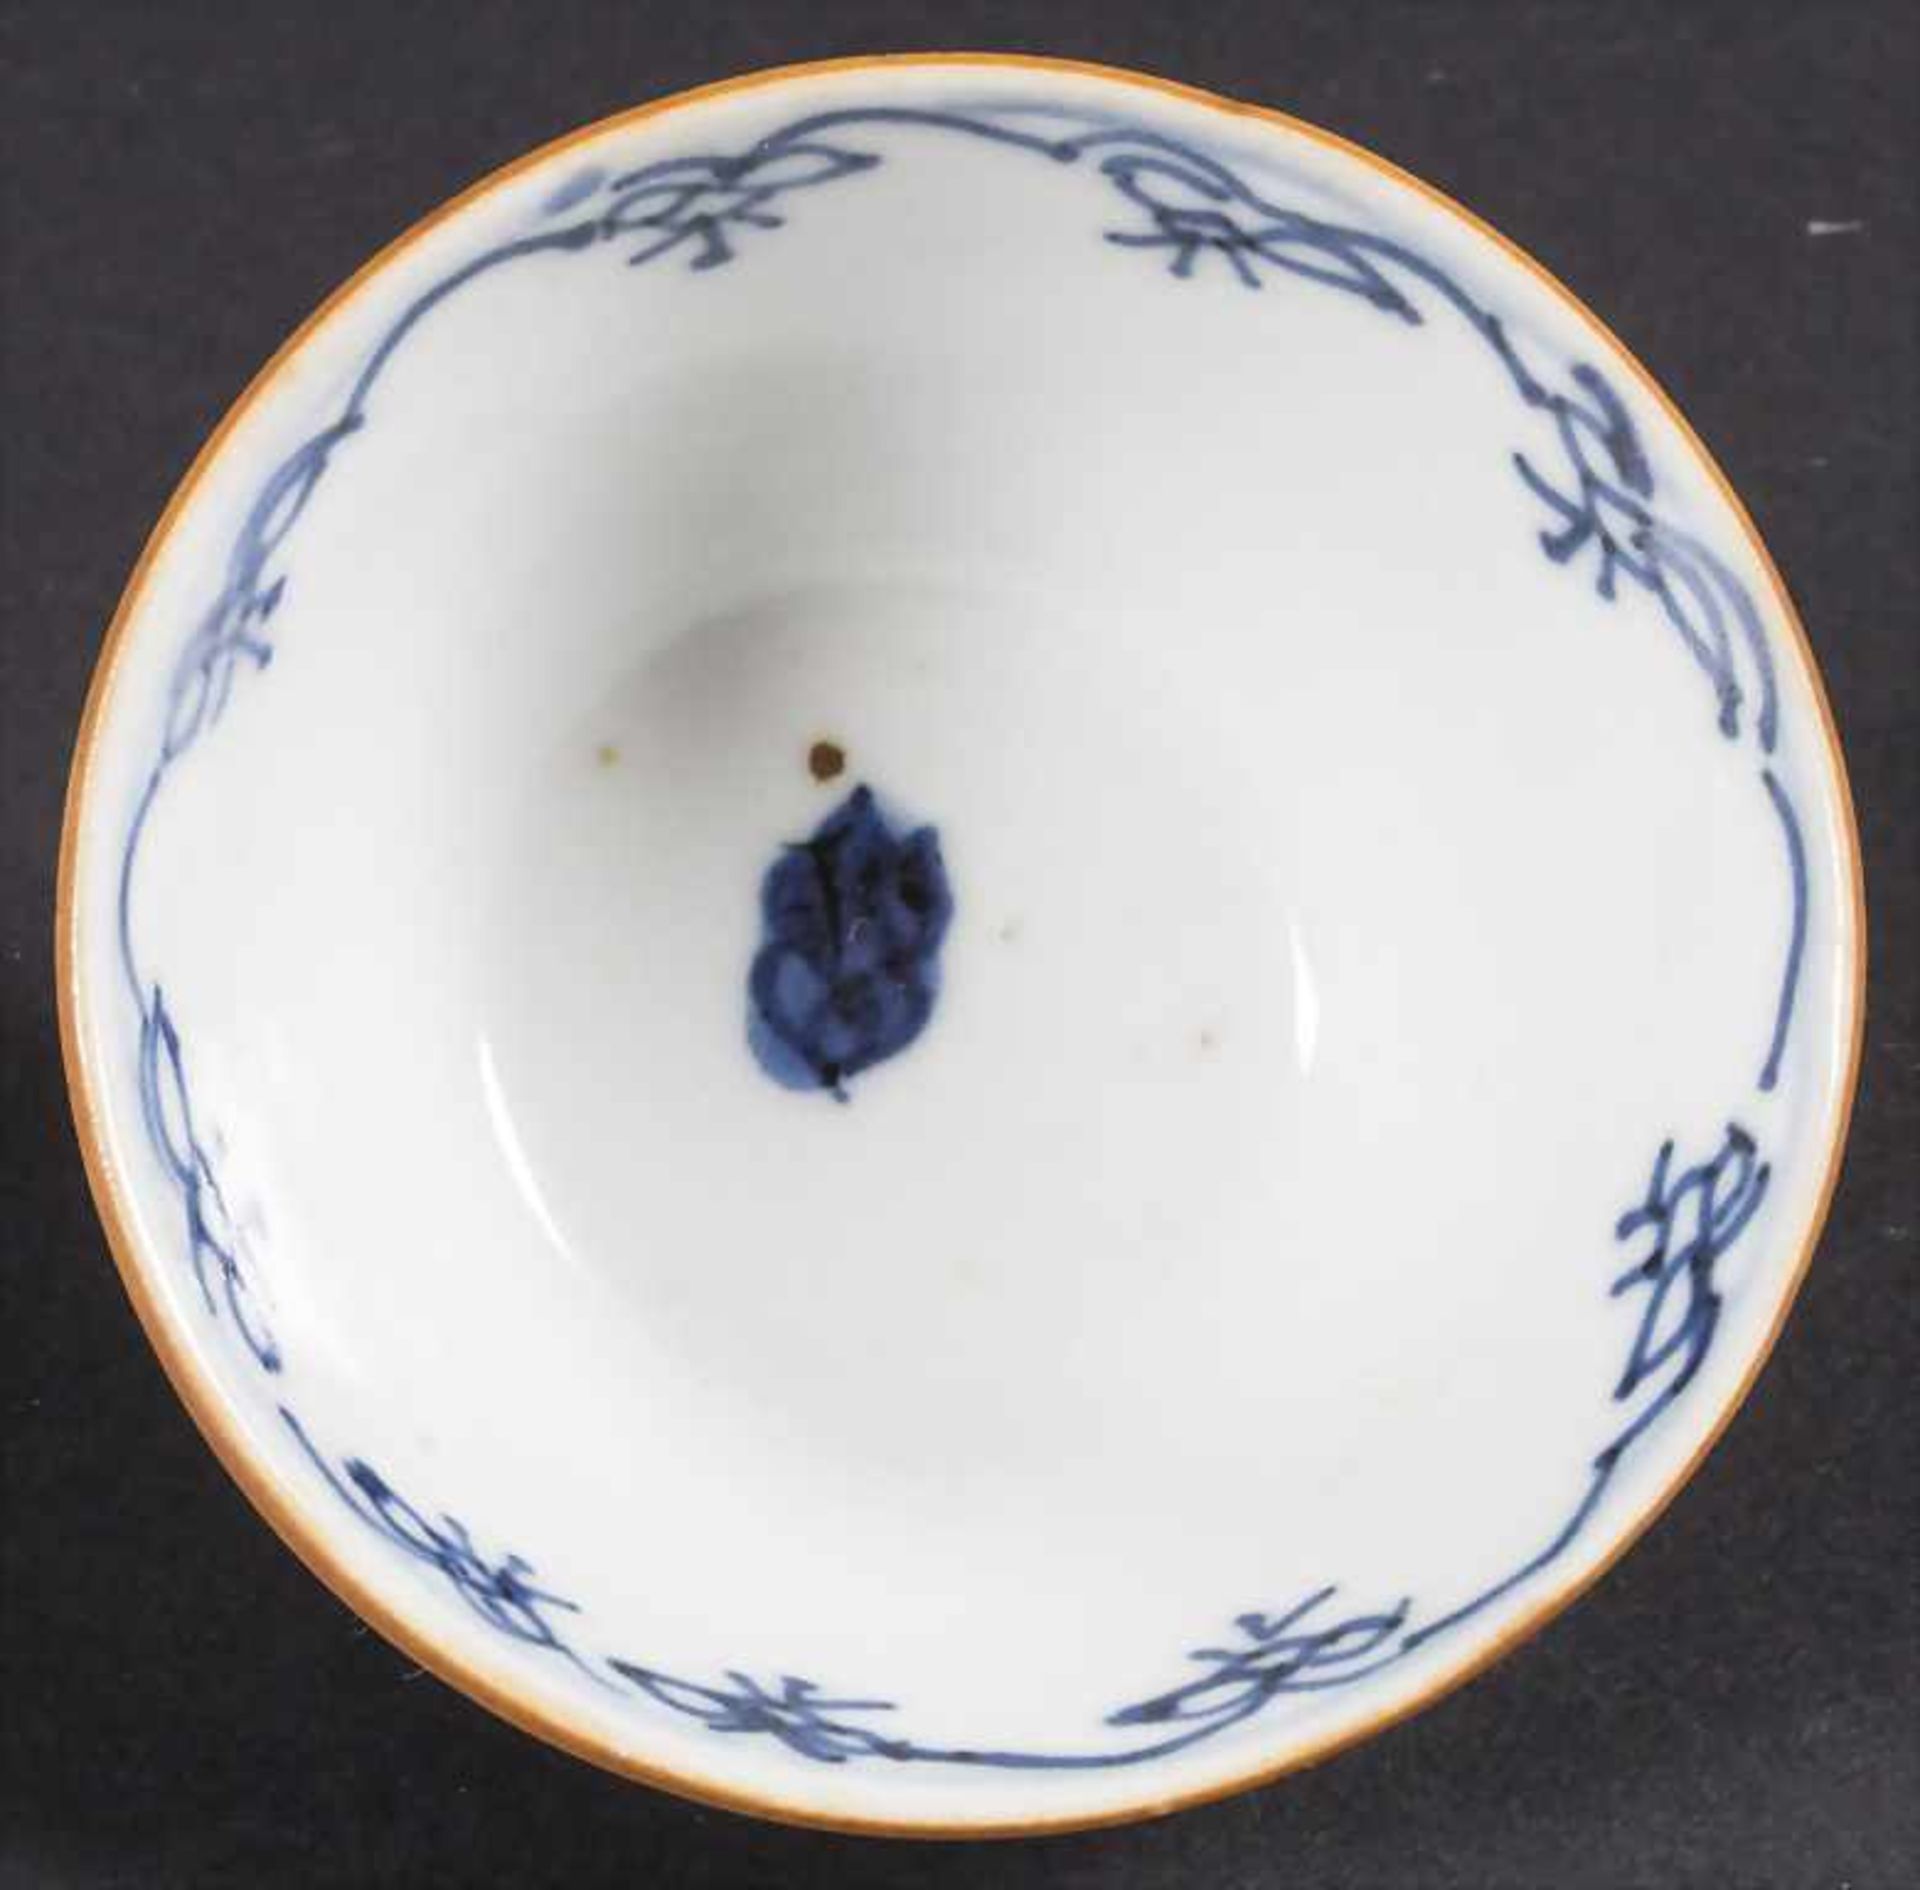 Kumme mit Unterteller / A bowl with plate, China, Qing-Dynastie (1644-1911), wohl 18.Jh. (Kangxi- - Image 5 of 7